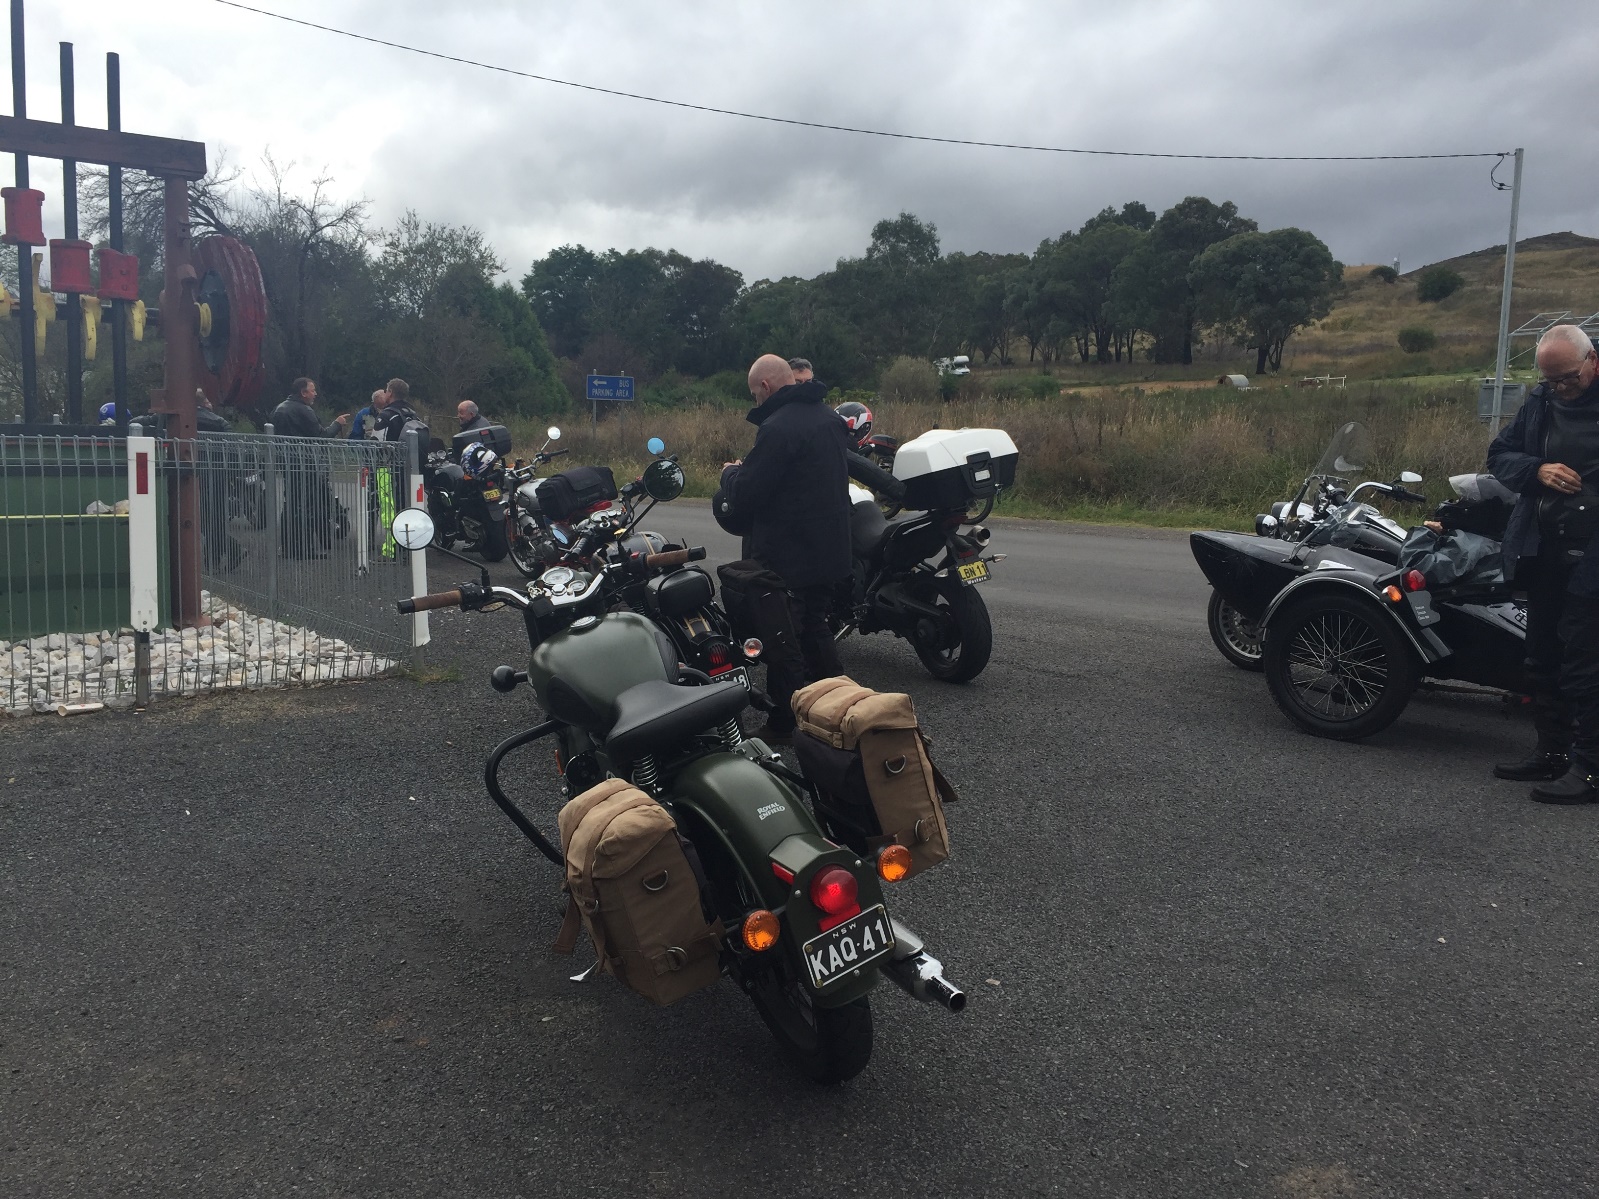 A group of motorcycles parked on the side of a road

Description automatically generated with low confidence